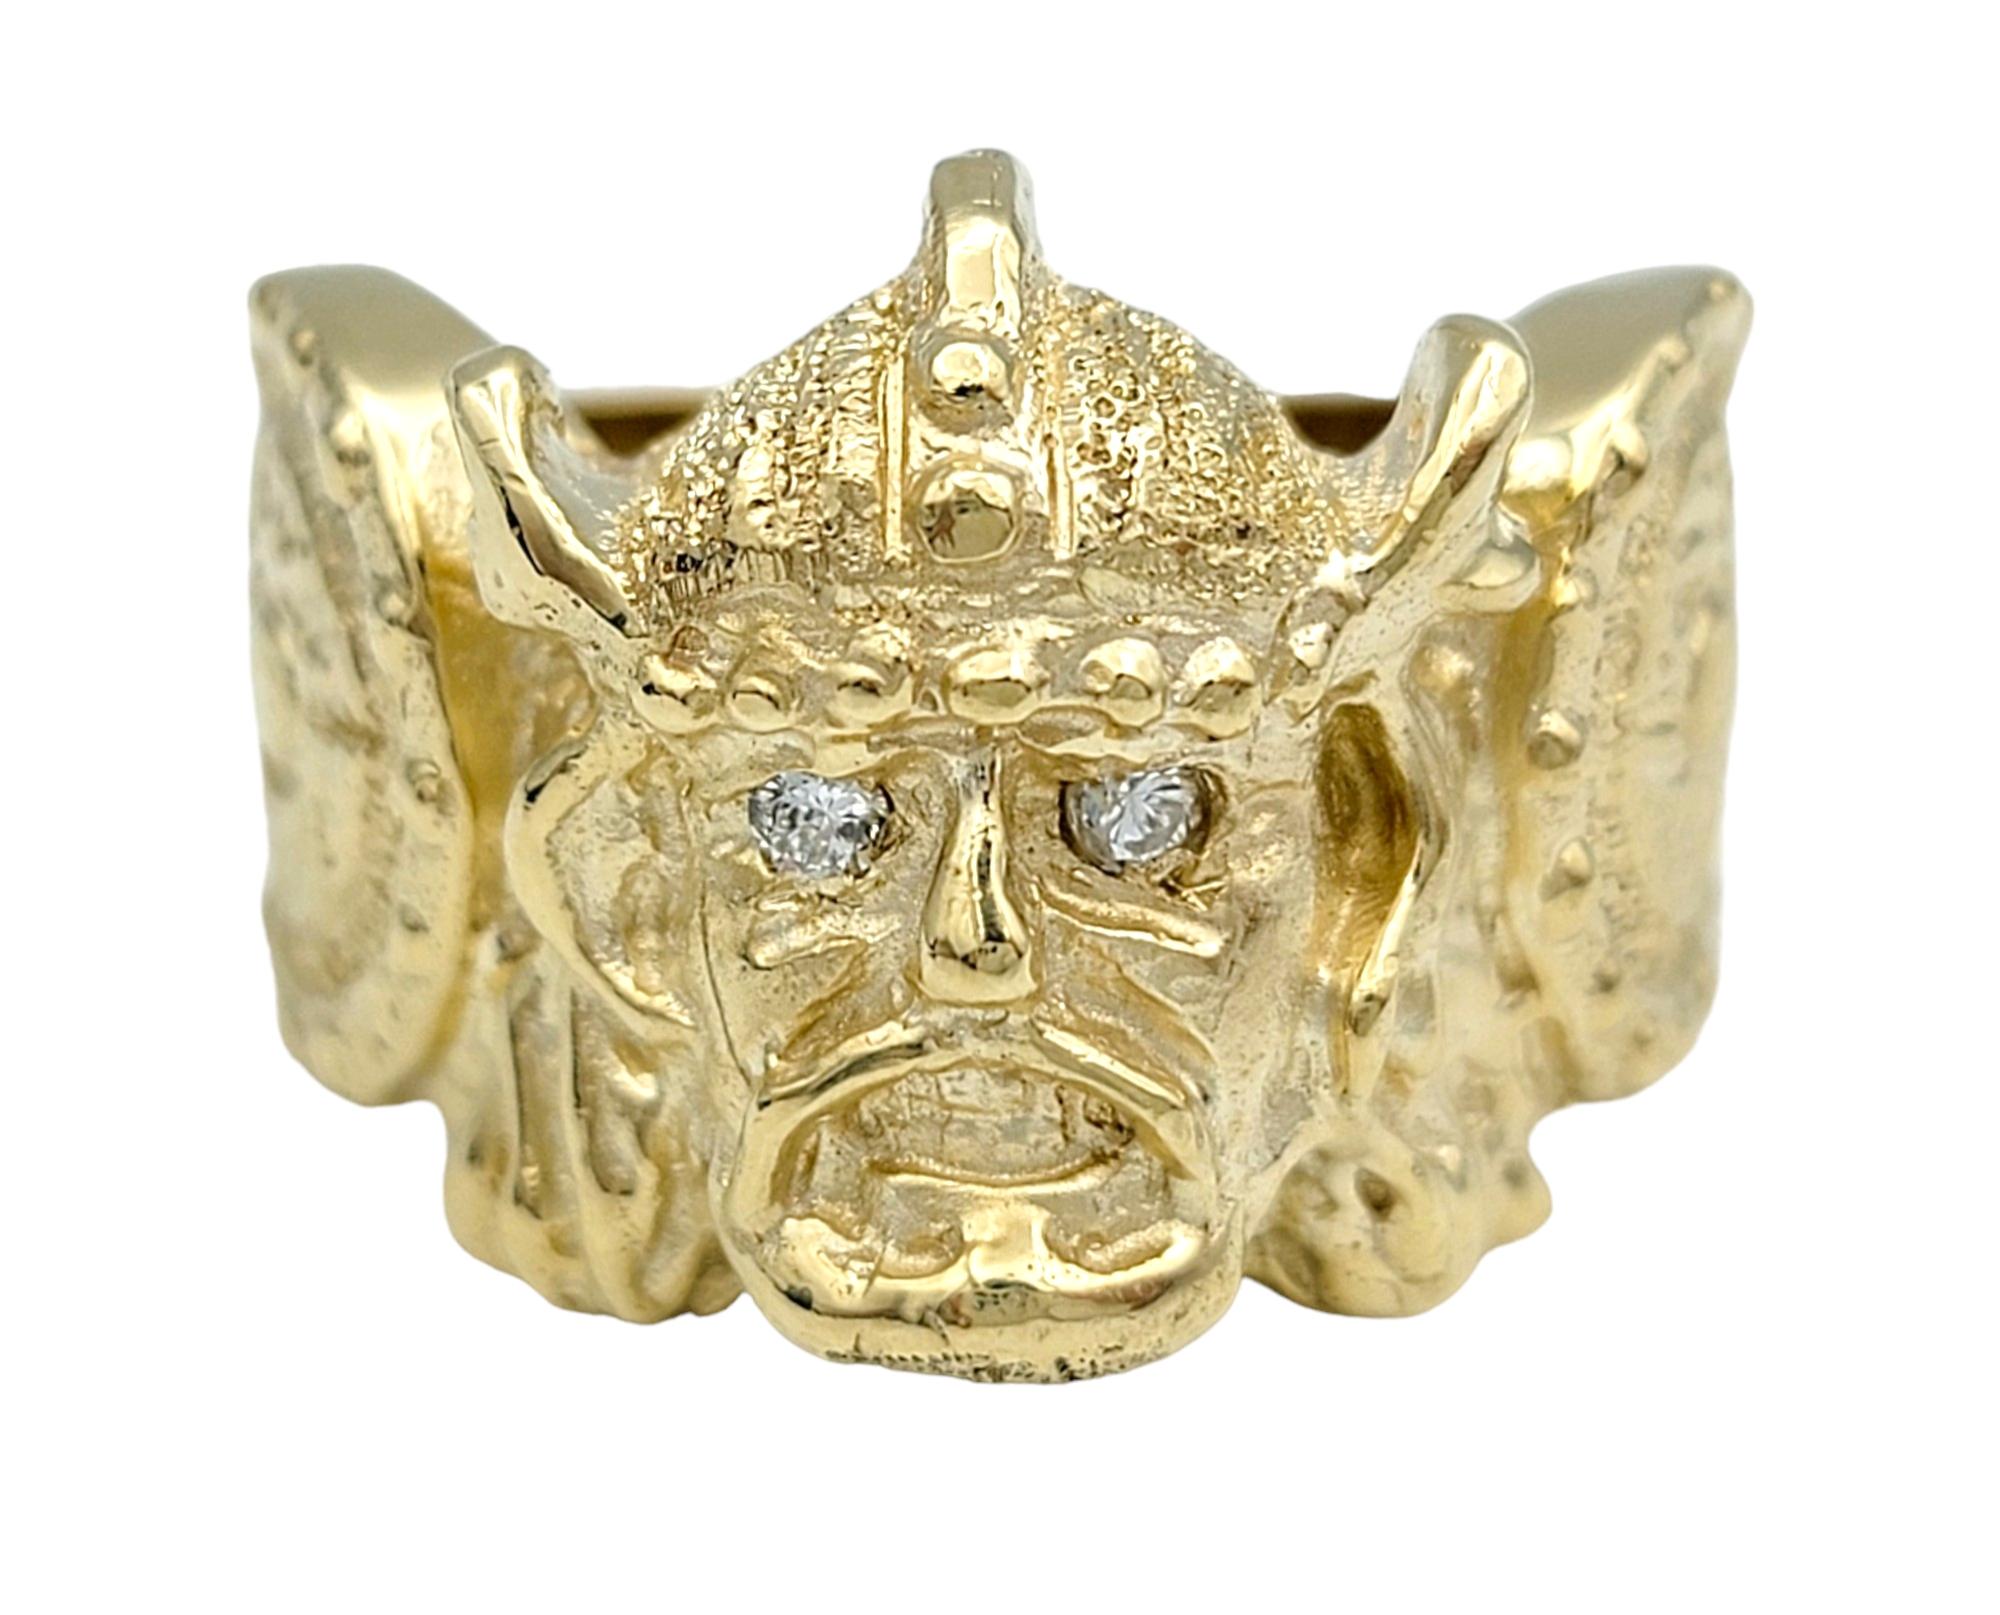 Ring Size: 10

This unique carved Viking ring and shield ring, crafted in 14 karat yellow gold, embodies the spirit of an ancient warriors with a touch of modern sophistication. The intricate detailing on the rings depicts a Viking shield motif,